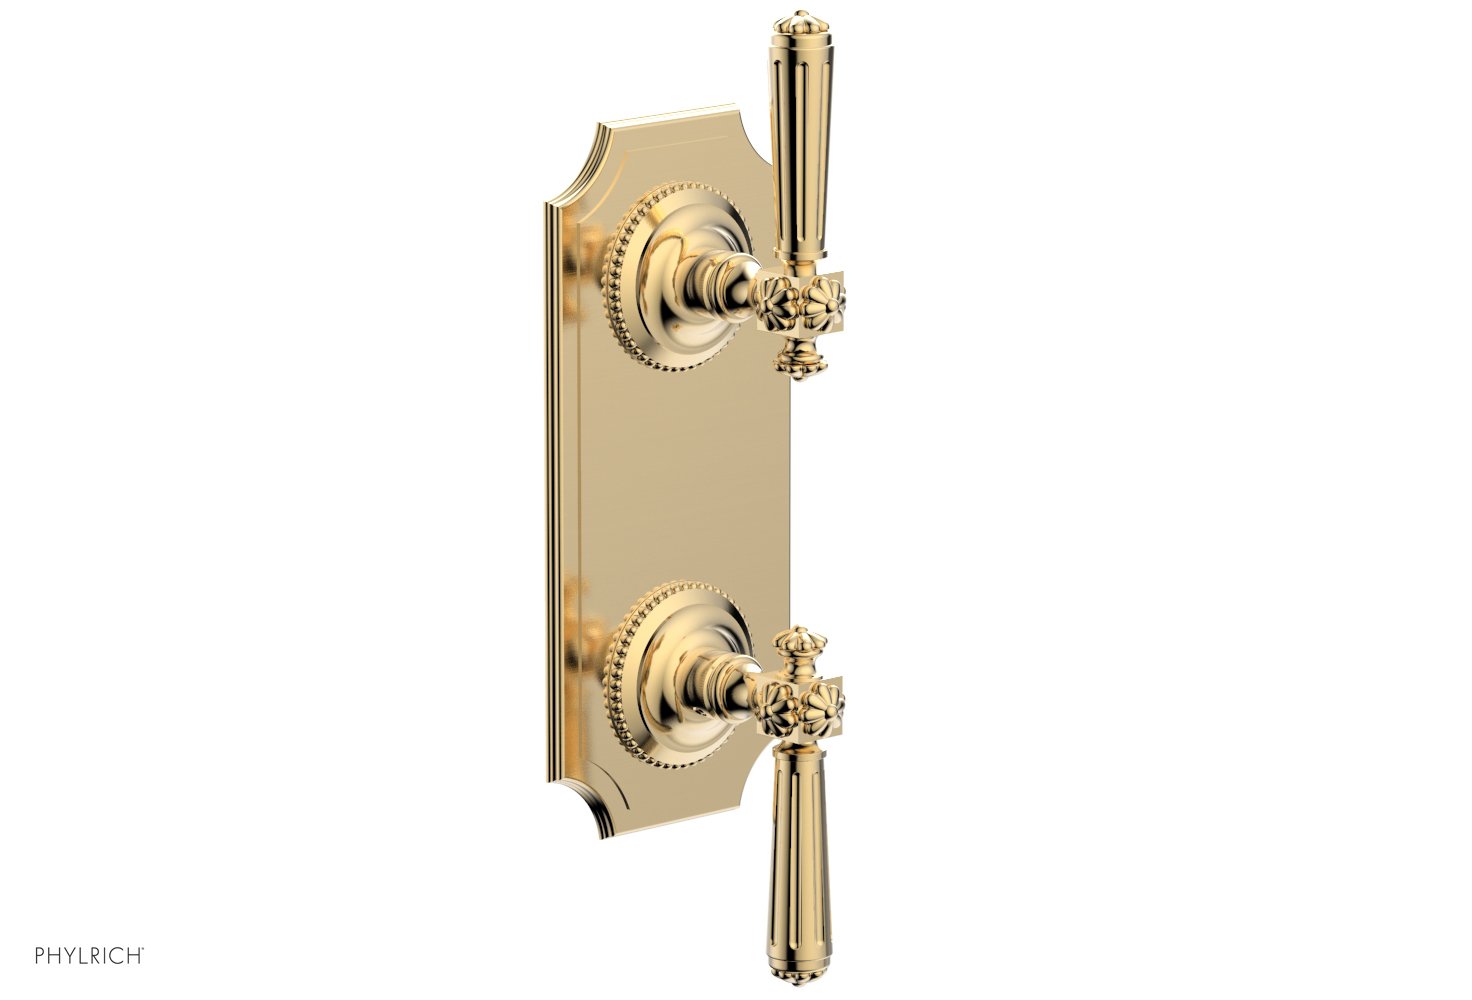 Phylrich MARVELLE Thermostatic Valve with Volume Control or Diverter